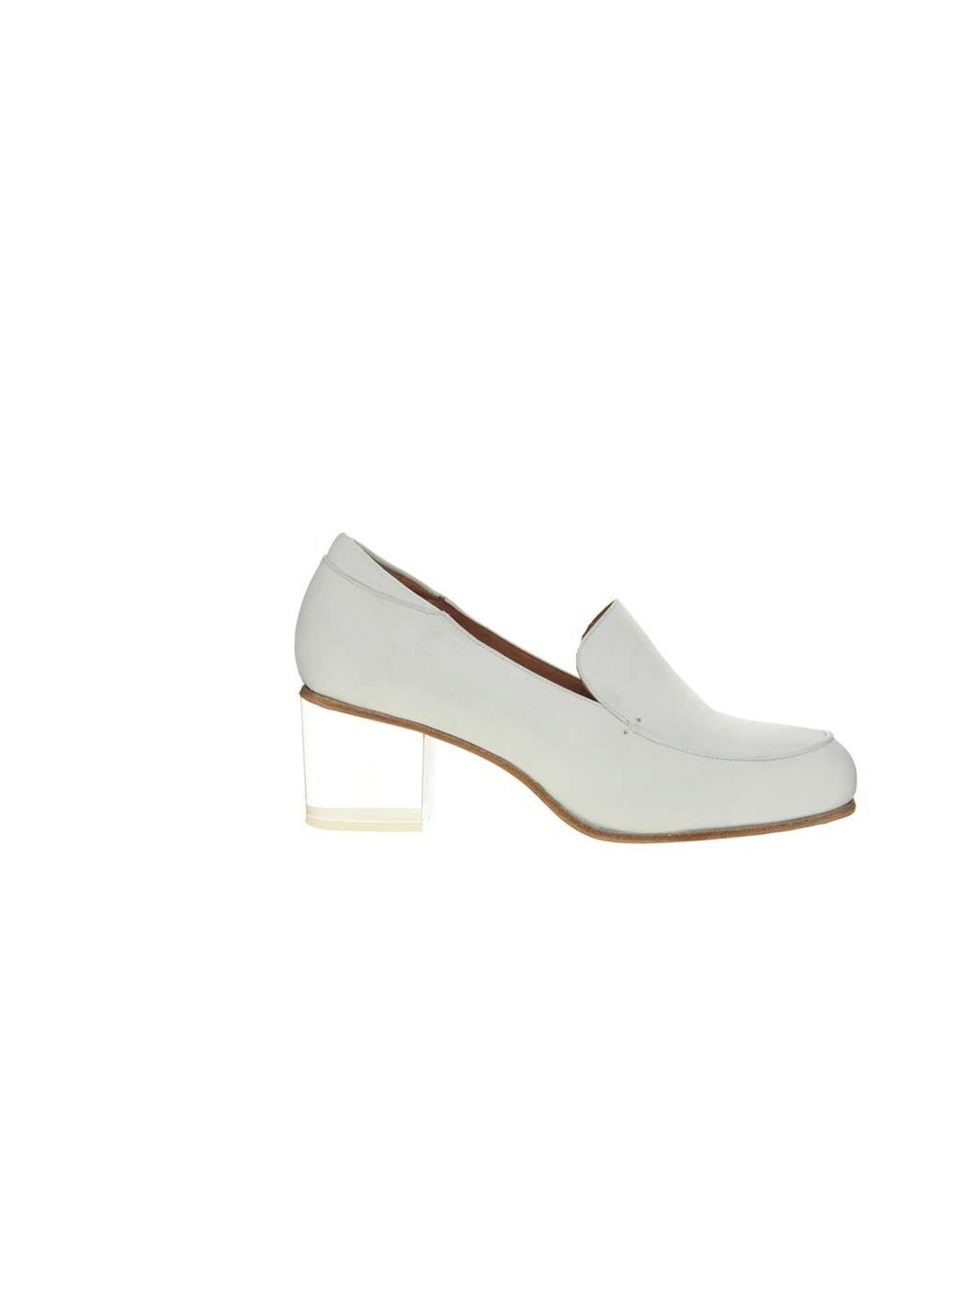 <p>We love the unexpected flash of white shoes in winter - they'll give a lift to any outfit.</p><p><a href="http://www.asos.com/ASOS-White/ASOS-WHITE-WARWICK-Leather-Loafers/Prod/pgeproduct.aspx?iid=3427586&cid=6992&Rf900=1562&sh=0&pge=0&pgesize=204&sort